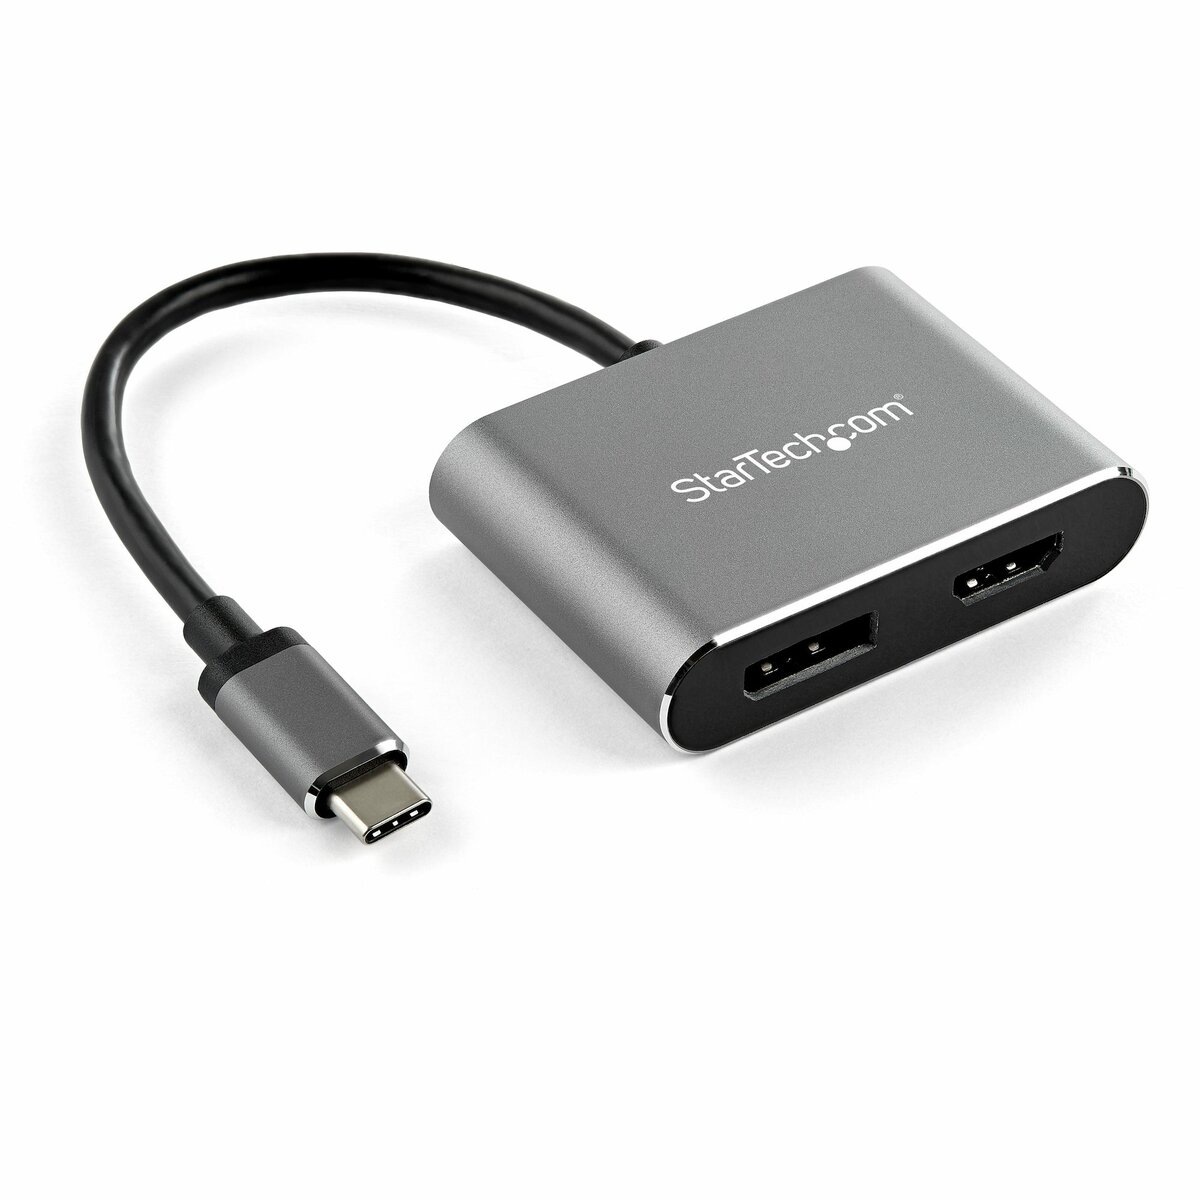 Product  StarTech.com USB C Multiport Video Adapter, 4K 60Hz USB-C to HDMI  2.0 or DisplayPort 1.2 Monitor Adapter, USB Type-C 2-in-1 Display Converter  HDMI/DP HBR2 HDR, Thunderbolt 3 Compatible - USB-C